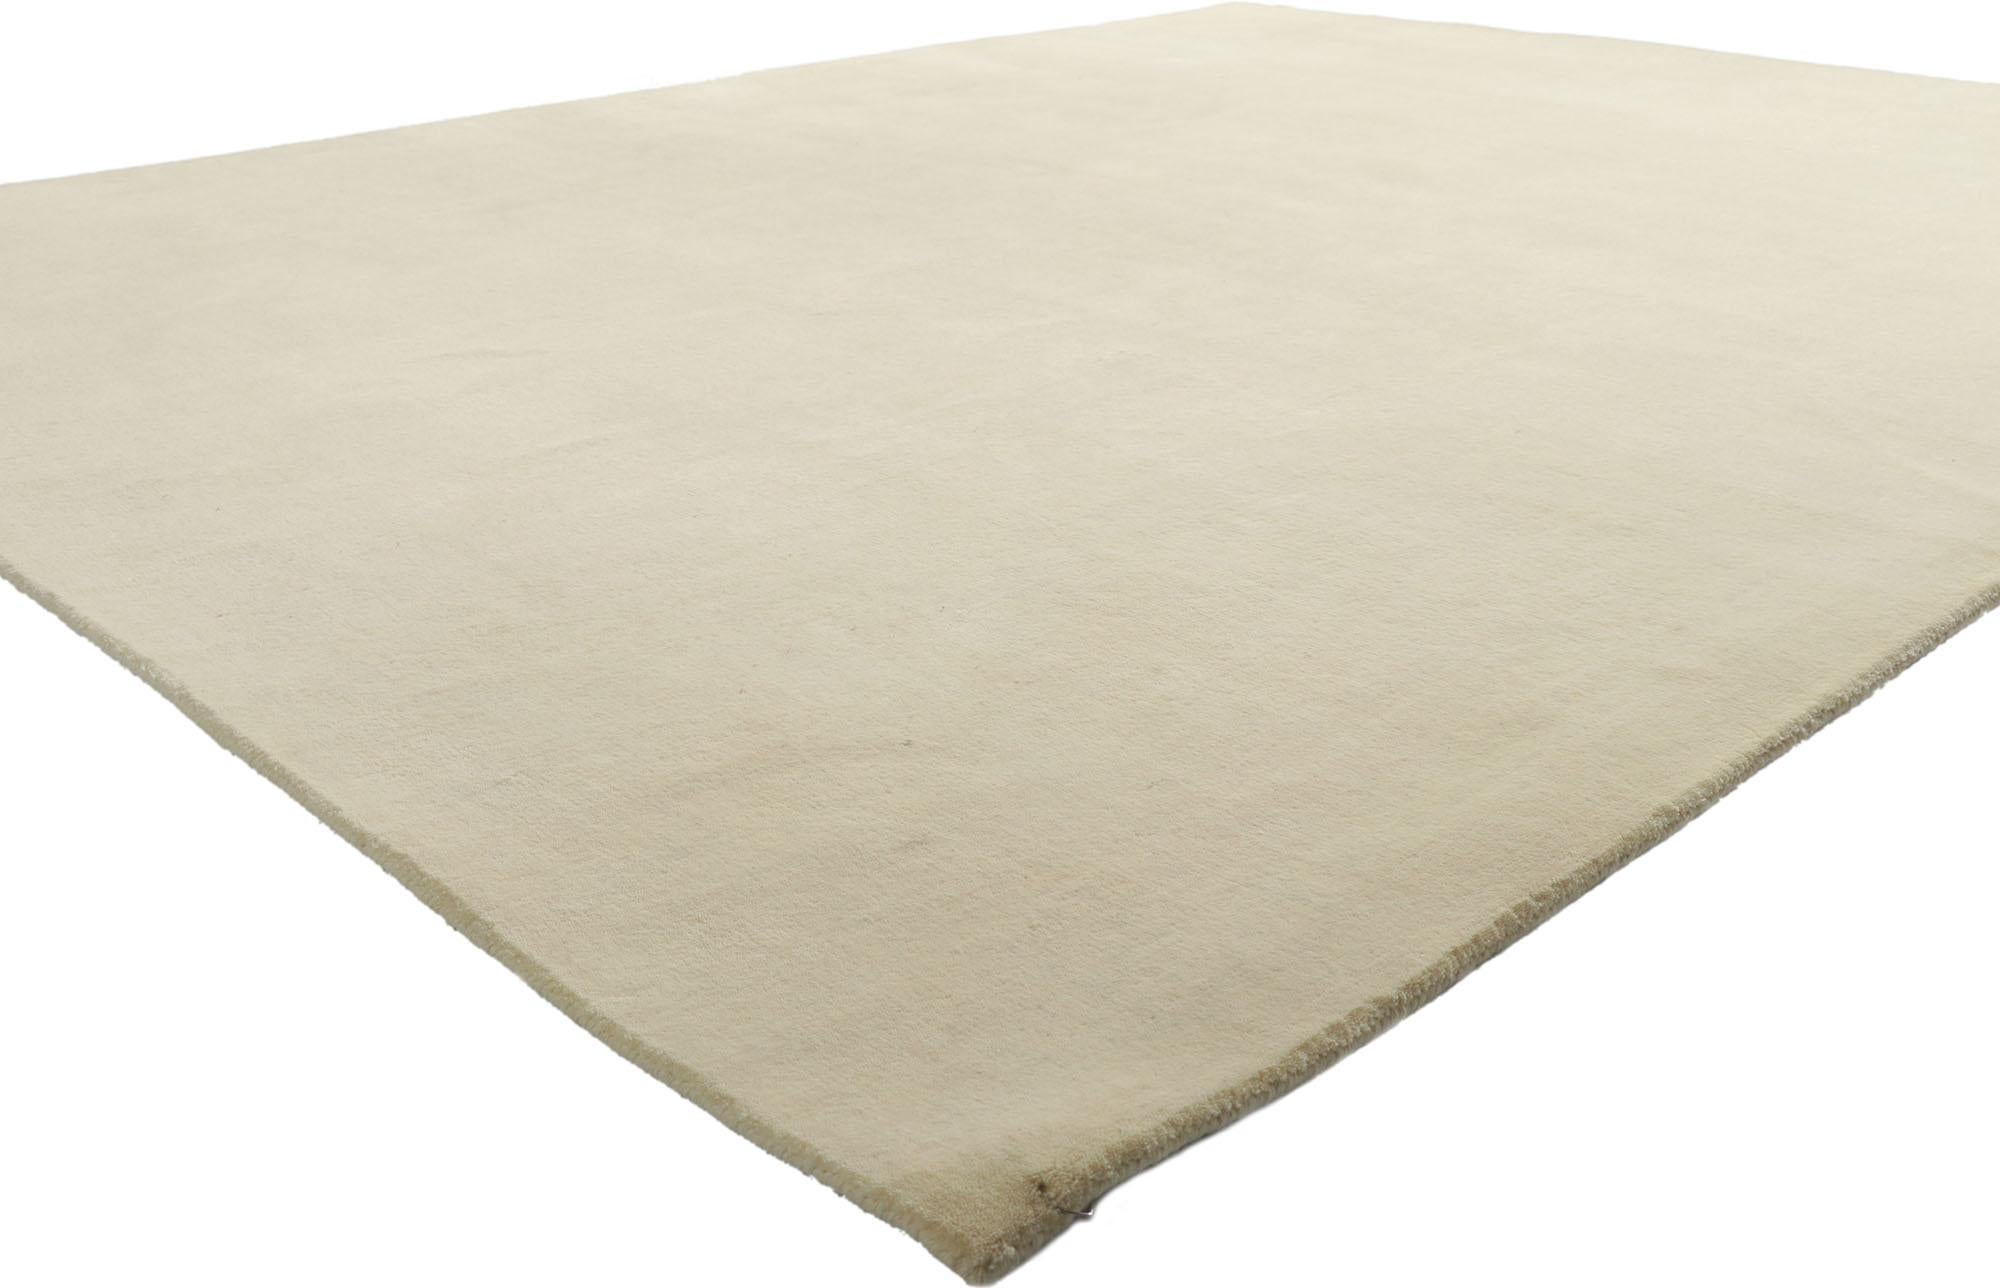 30748 New Contemporary Ivory Area Rug with Minimalist Style, 08'01 x 10'00. Enveloped in the enchanting realm of contemporary allure and nuanced minimalism, this meticulously crafted wool rug gracefully unfurls from the skilled looms of modern